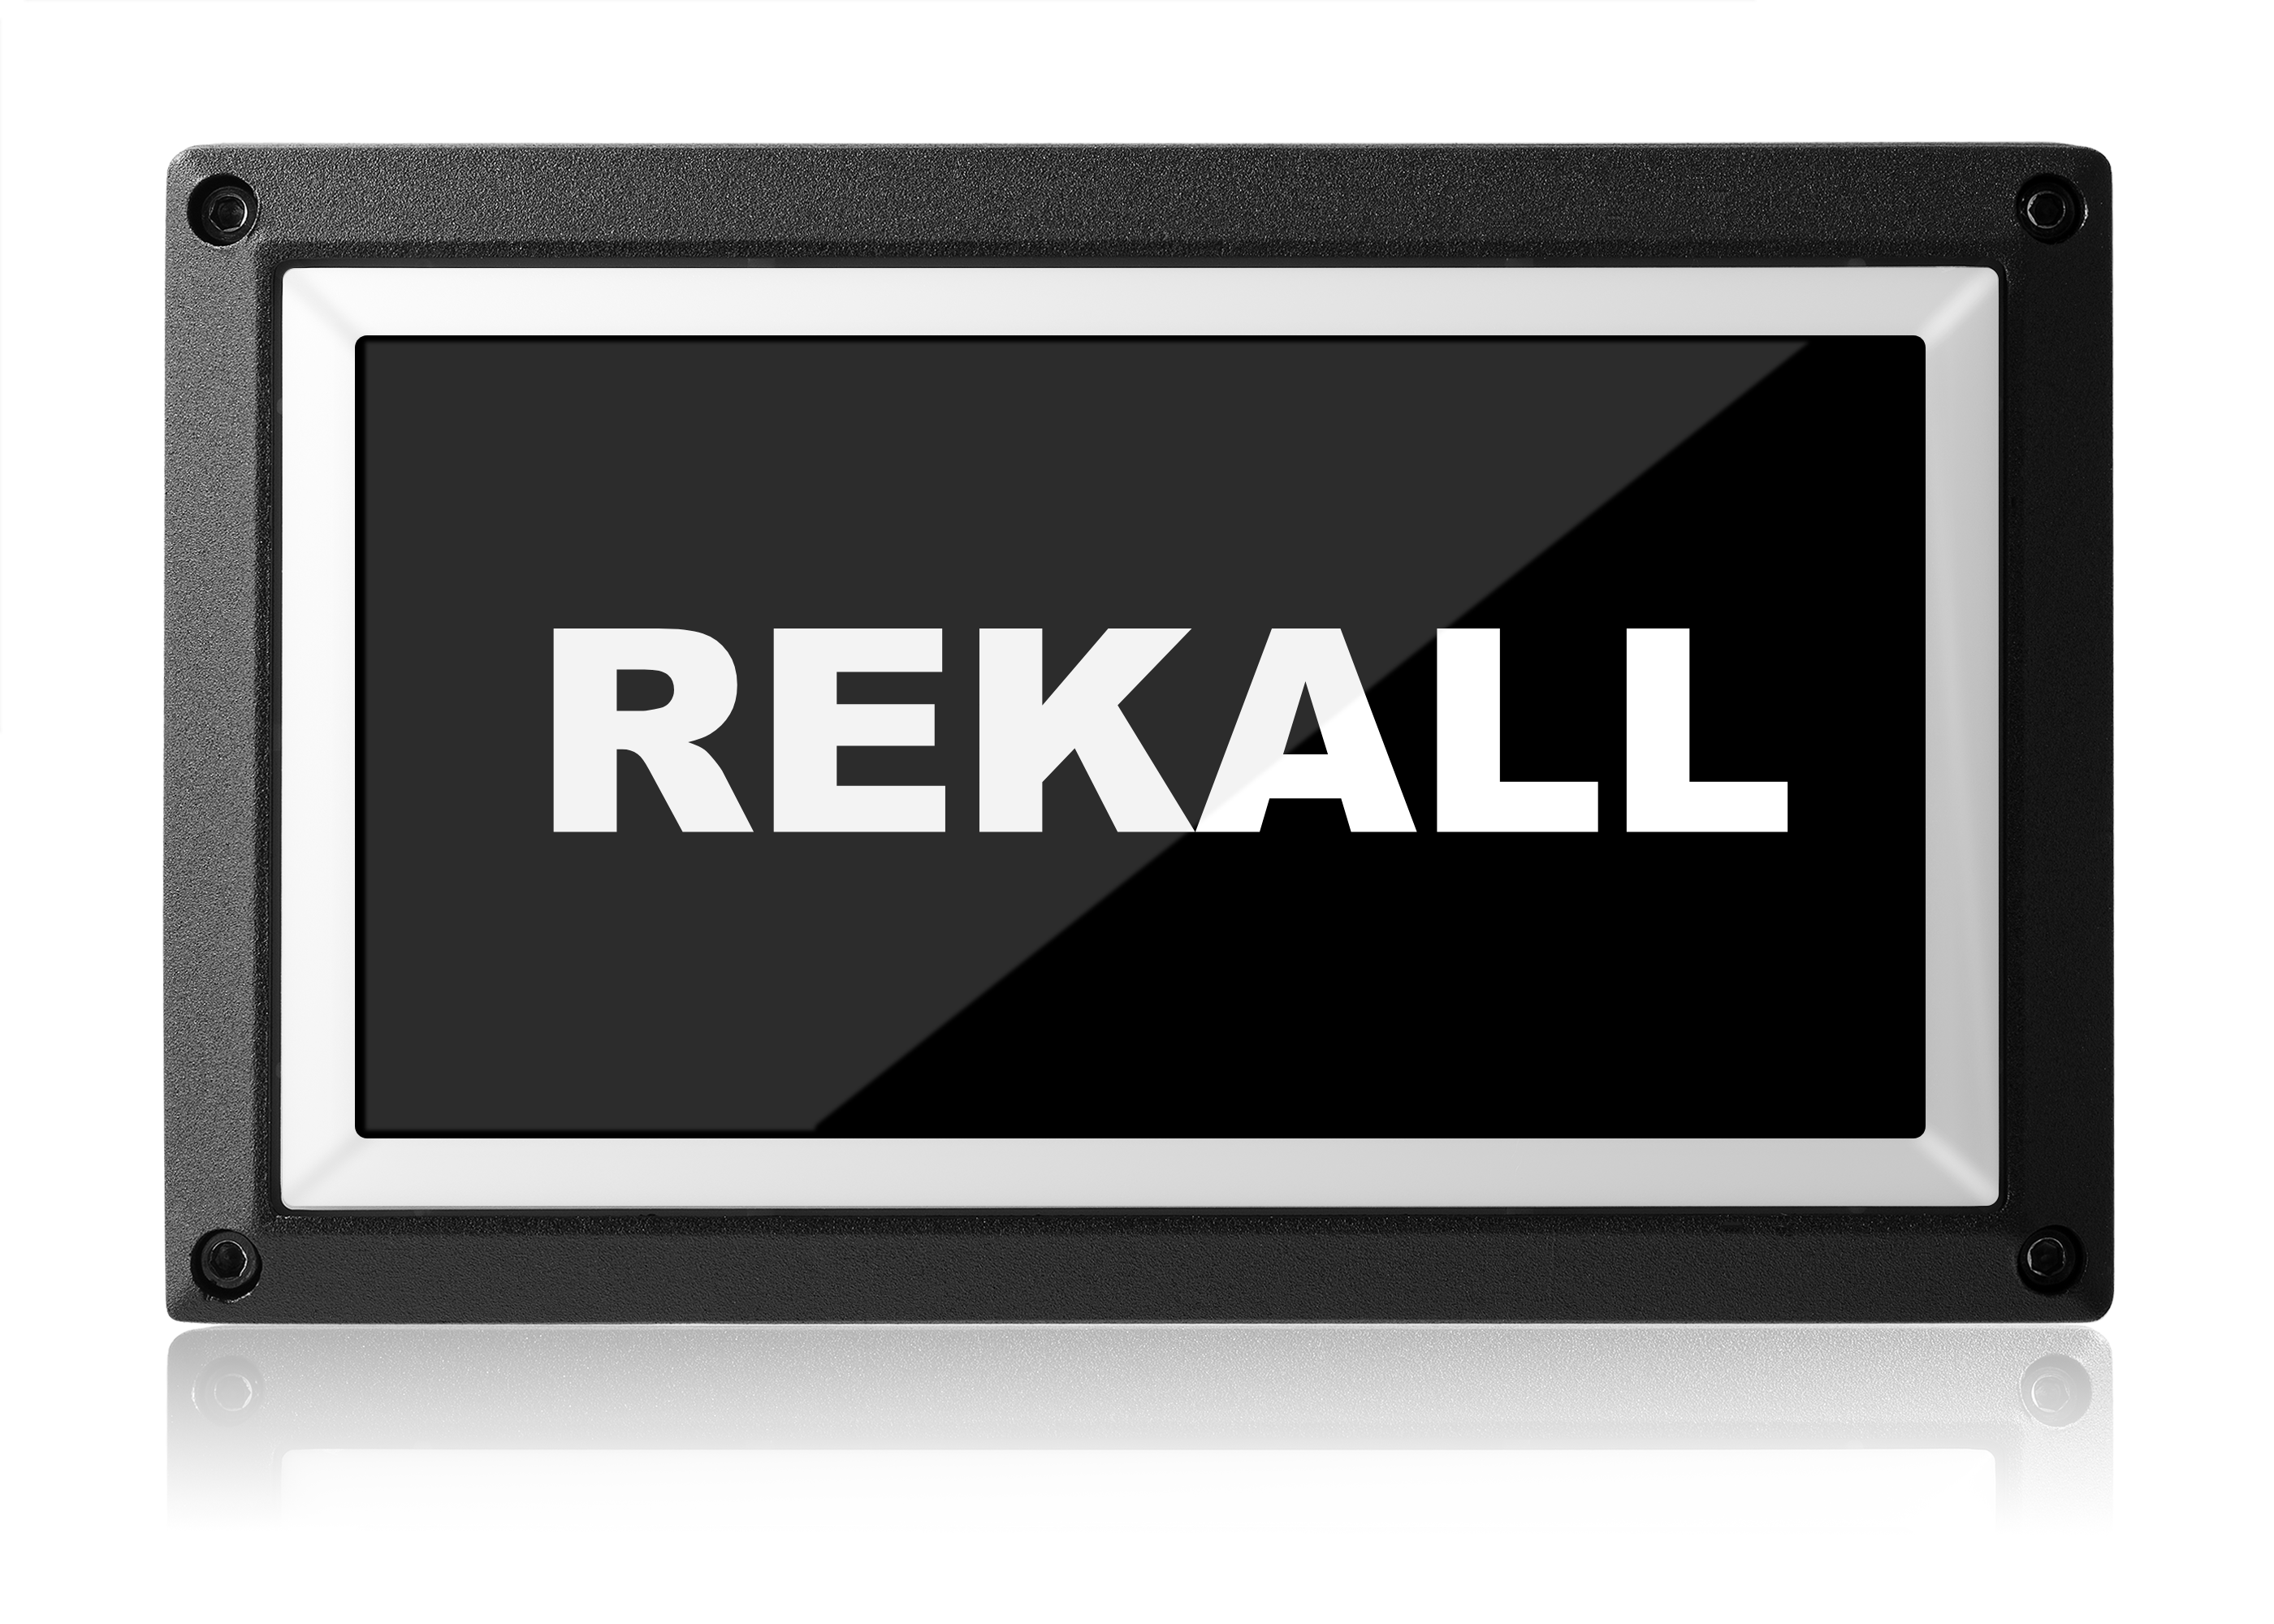 Confidential In Use - CONF - Rekall Dynamics LED Sign-